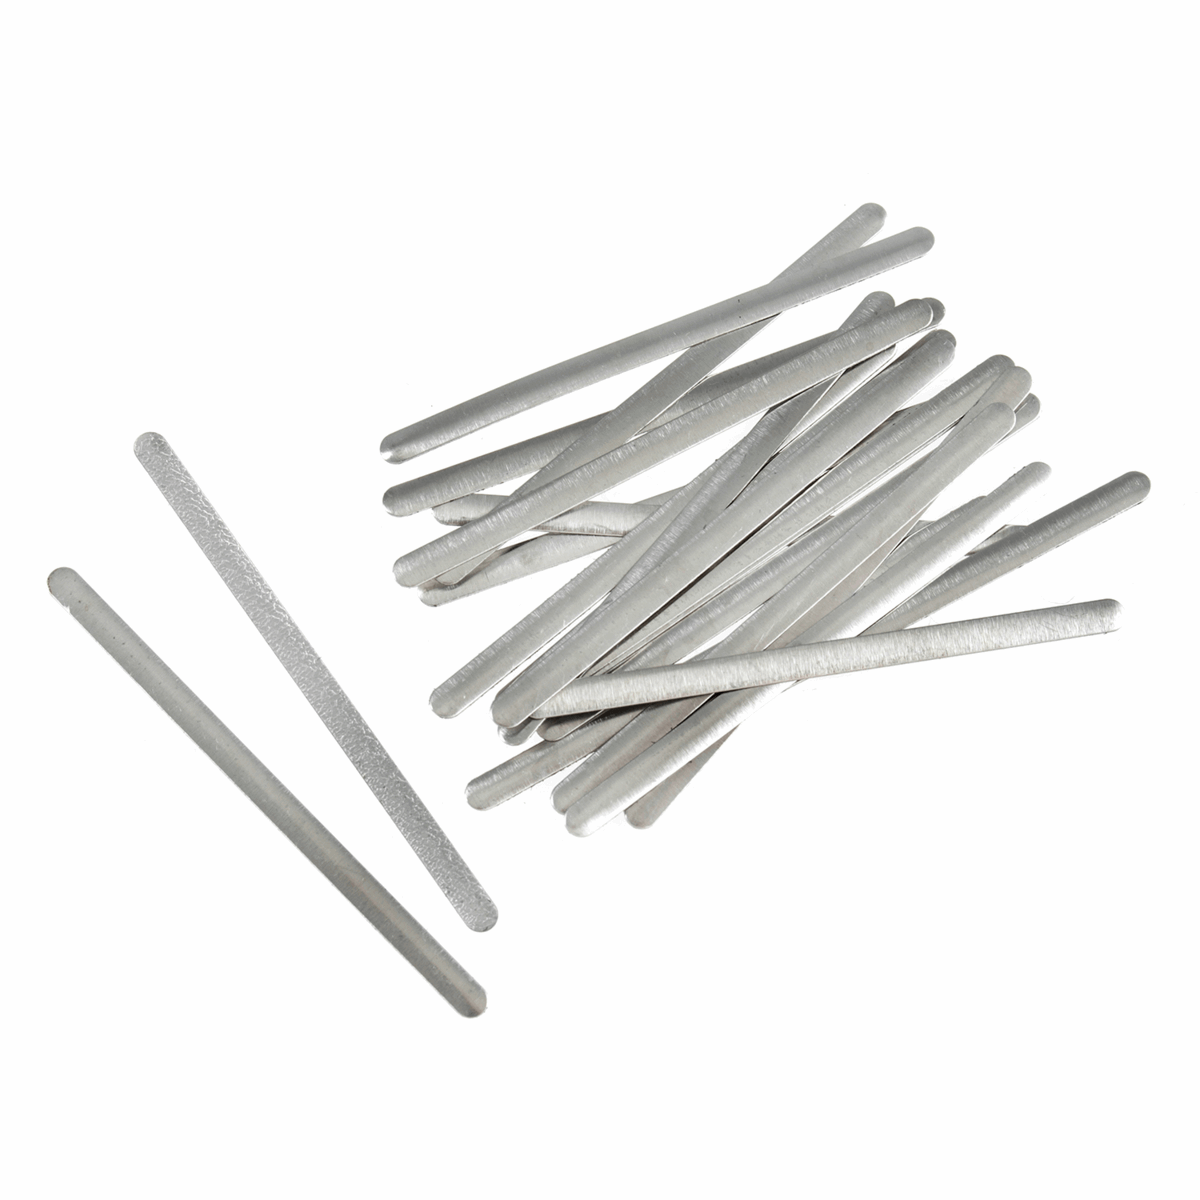 Aluminium Nose Bridge Clip strips / metal wires for facemask making/make your own.